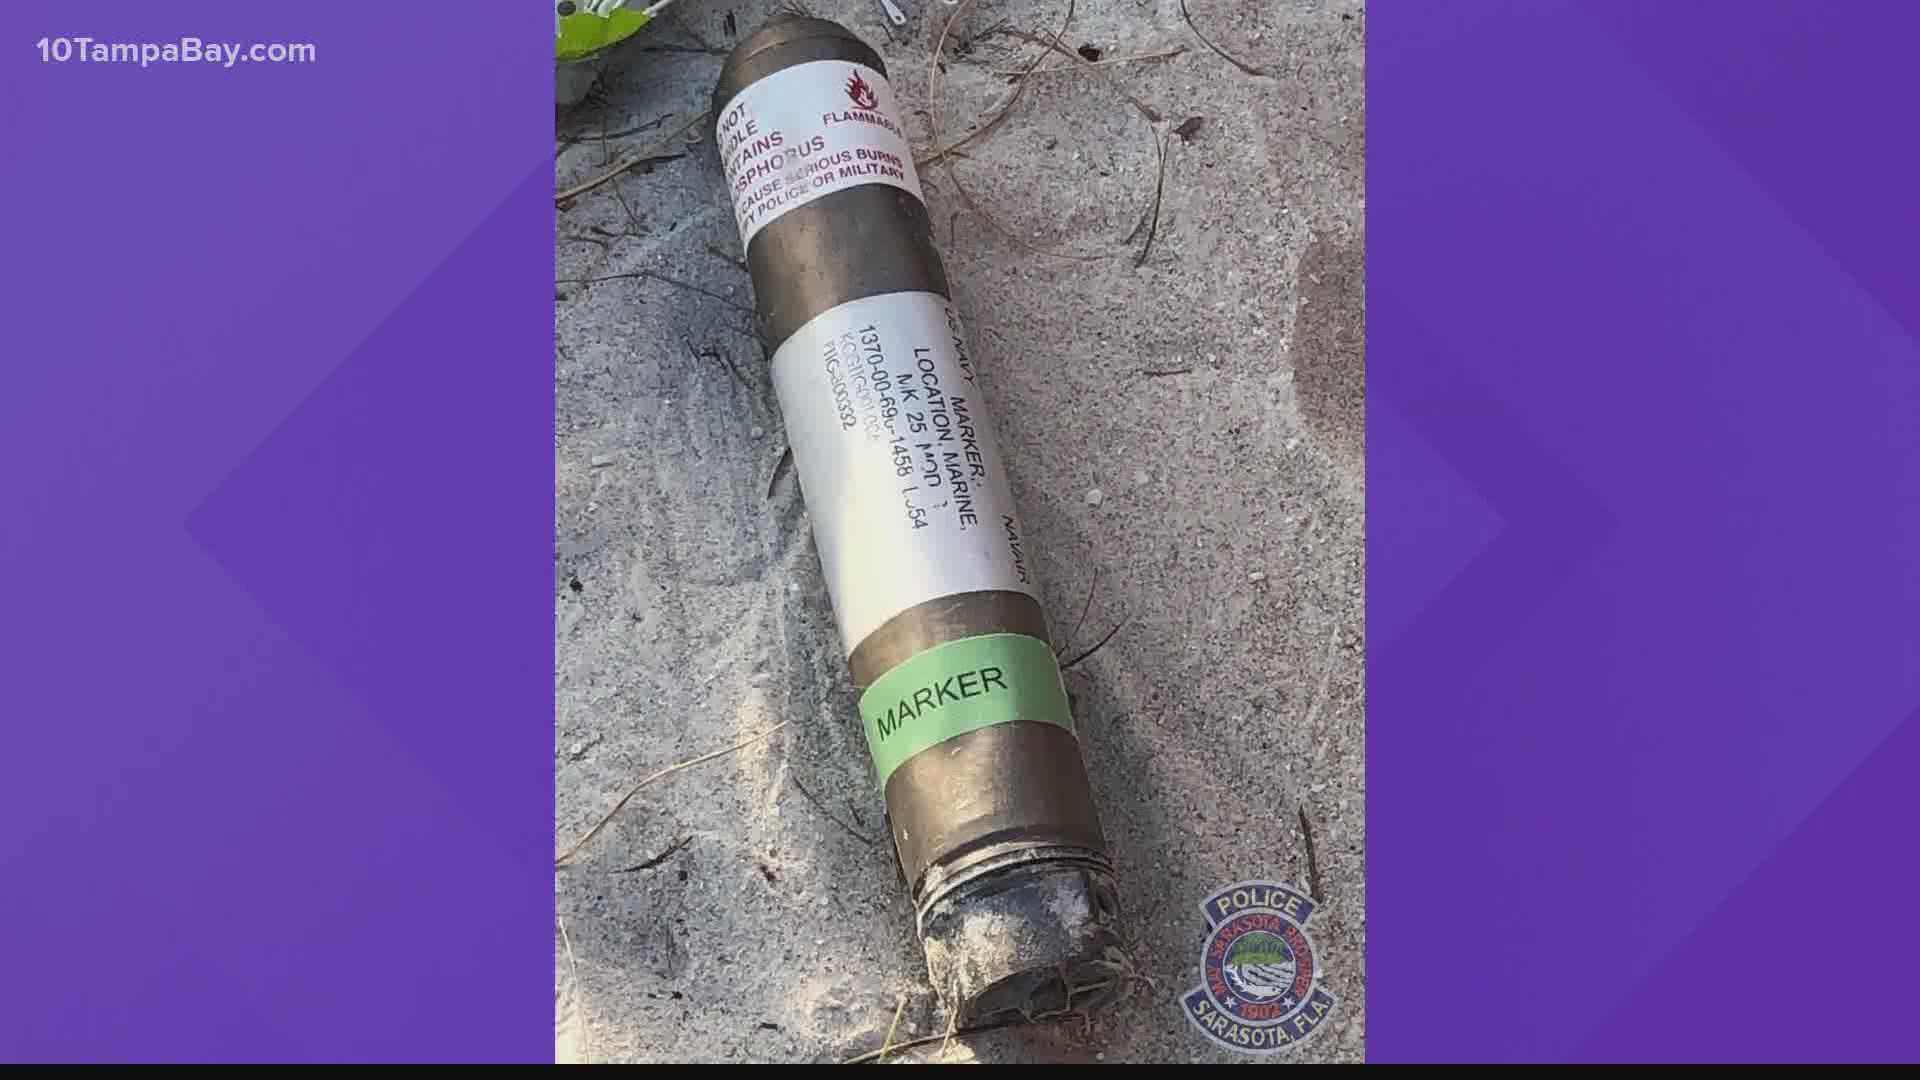 Police said crews from MacDill Air Force Base responded to properly dispose of the device.